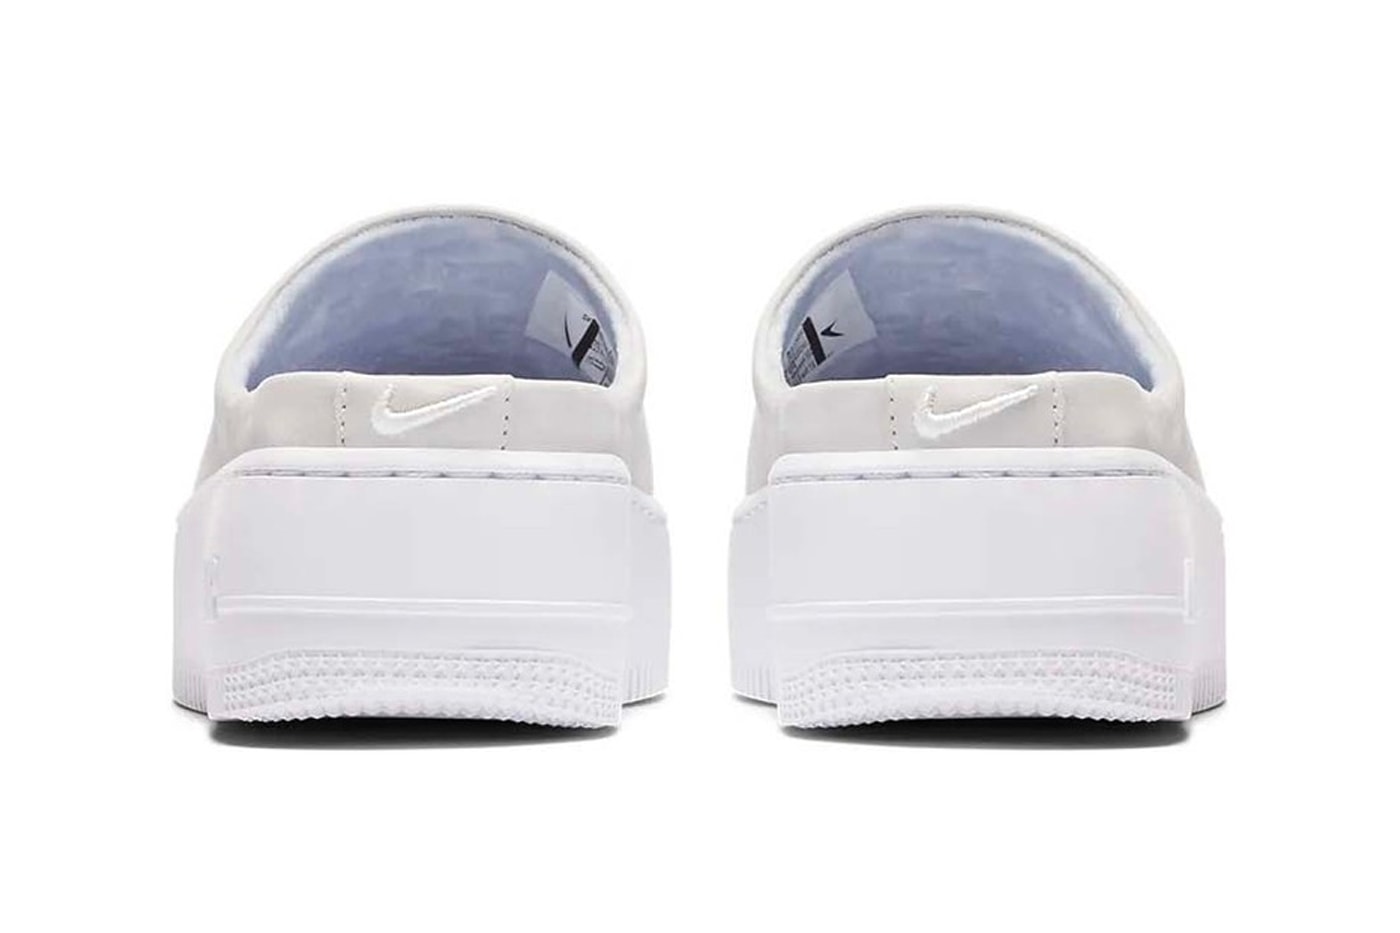 Nike's Air Force 1 Lover XX Premium Women's Shoes Mule Returns BV8249 001 slip on silhouette release info date price